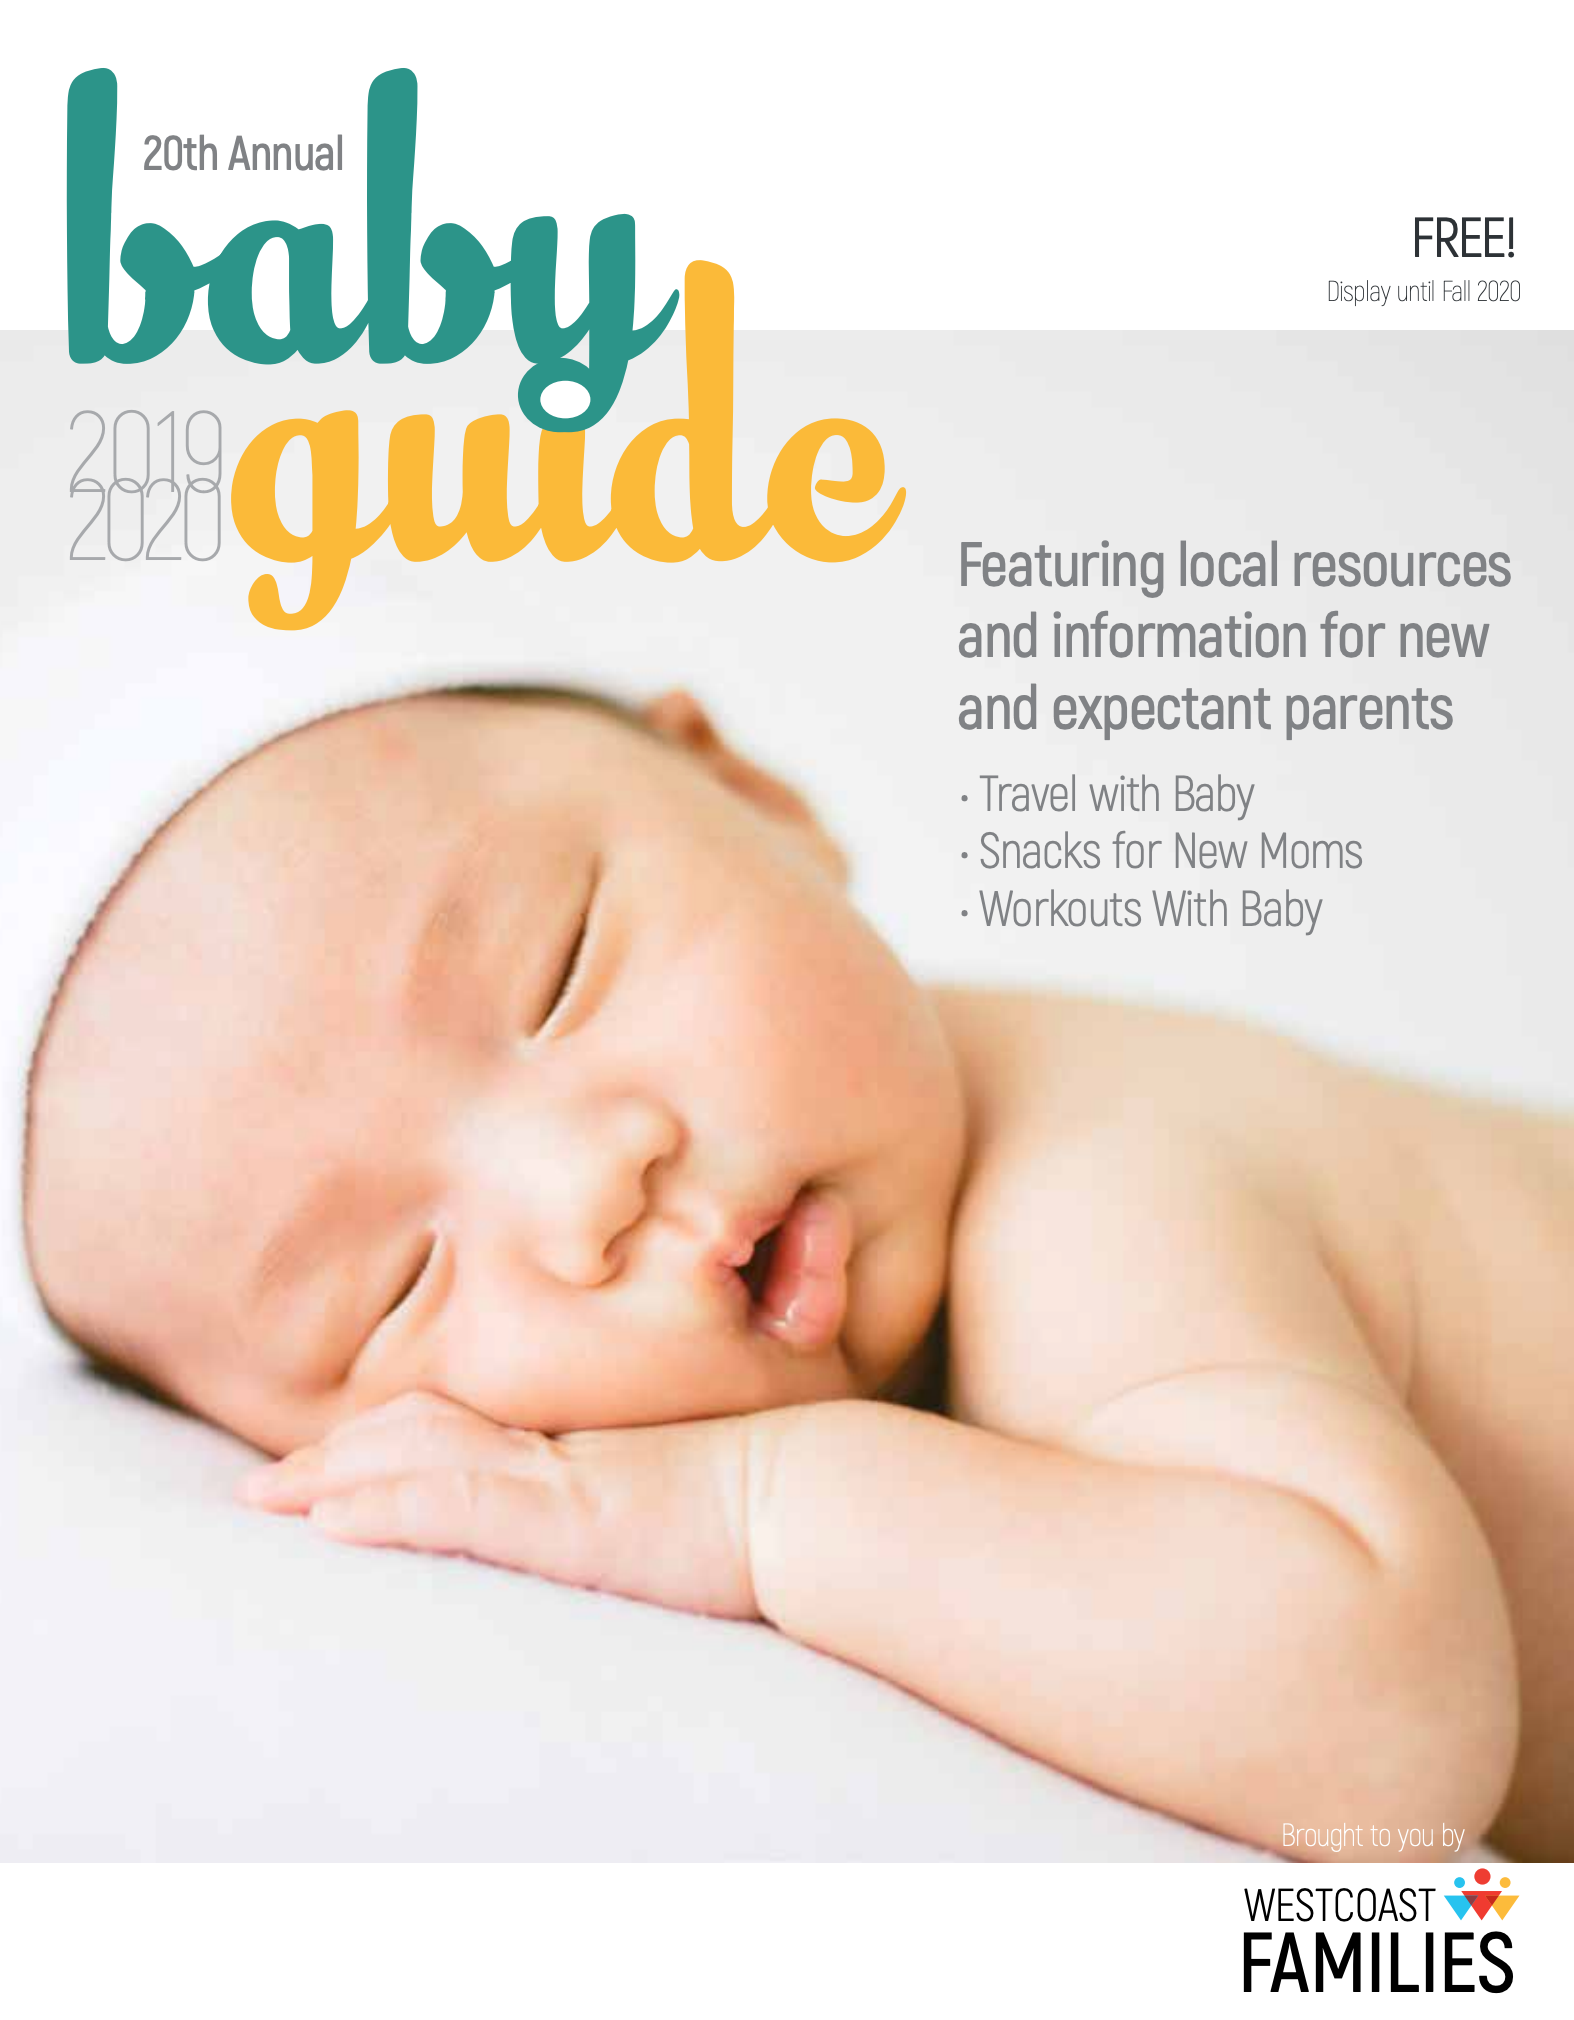 Top 5 Baby Gift Guide by Westcoast Families Magazine featuring Bonjour Baby Baskets